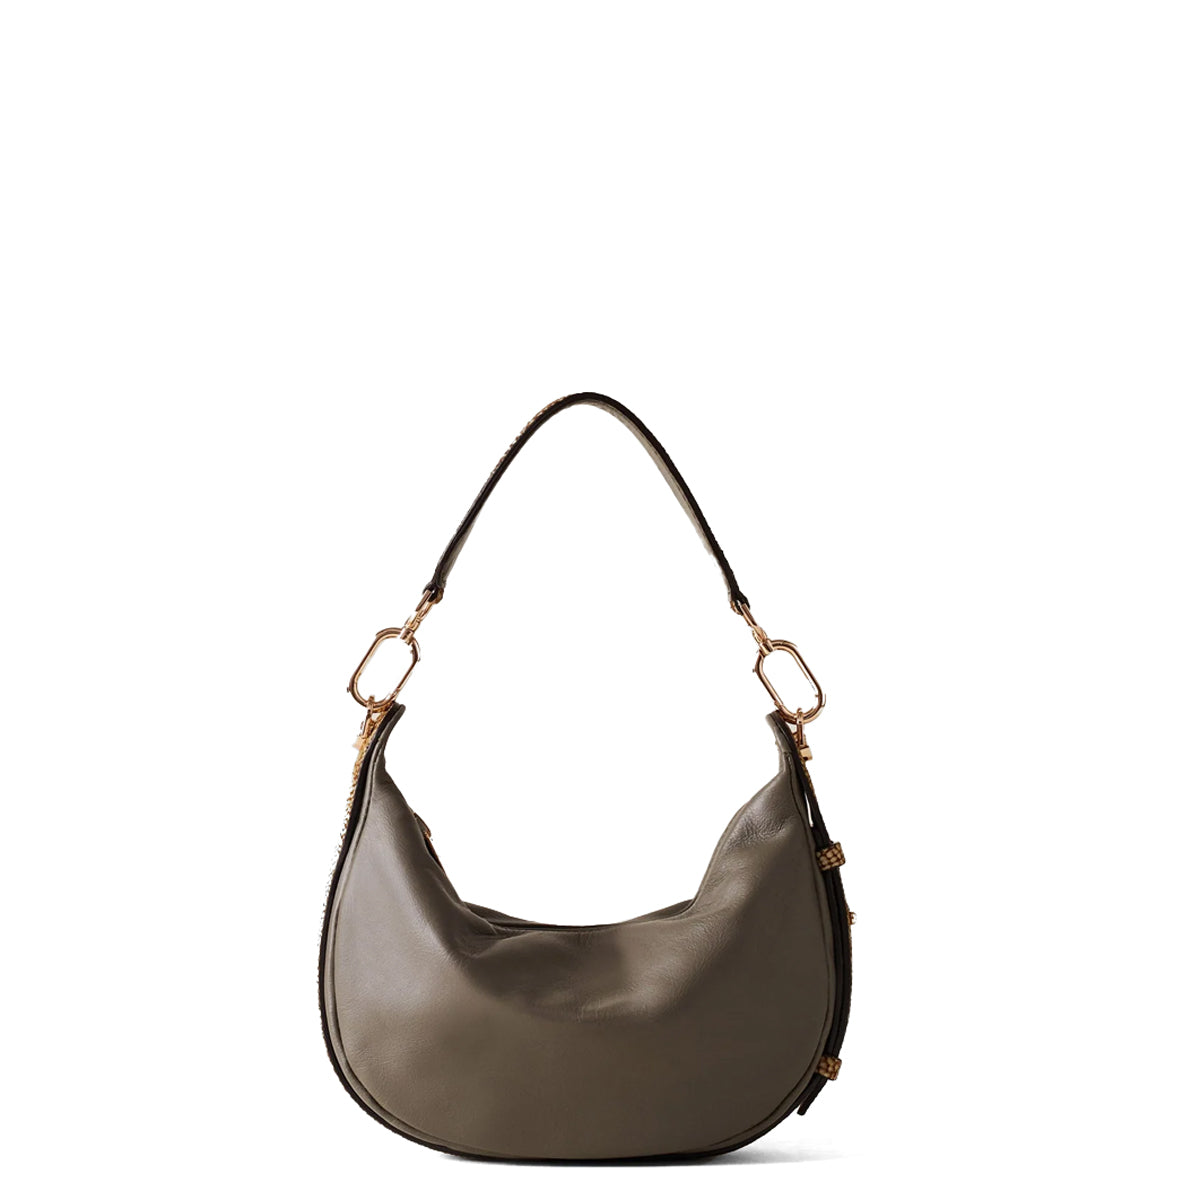 Borbonese - Hobo Bag Oyster Small Clay Grey OP Naturale - 923737AR1 - CLAY/GREY/OP/NATURALE